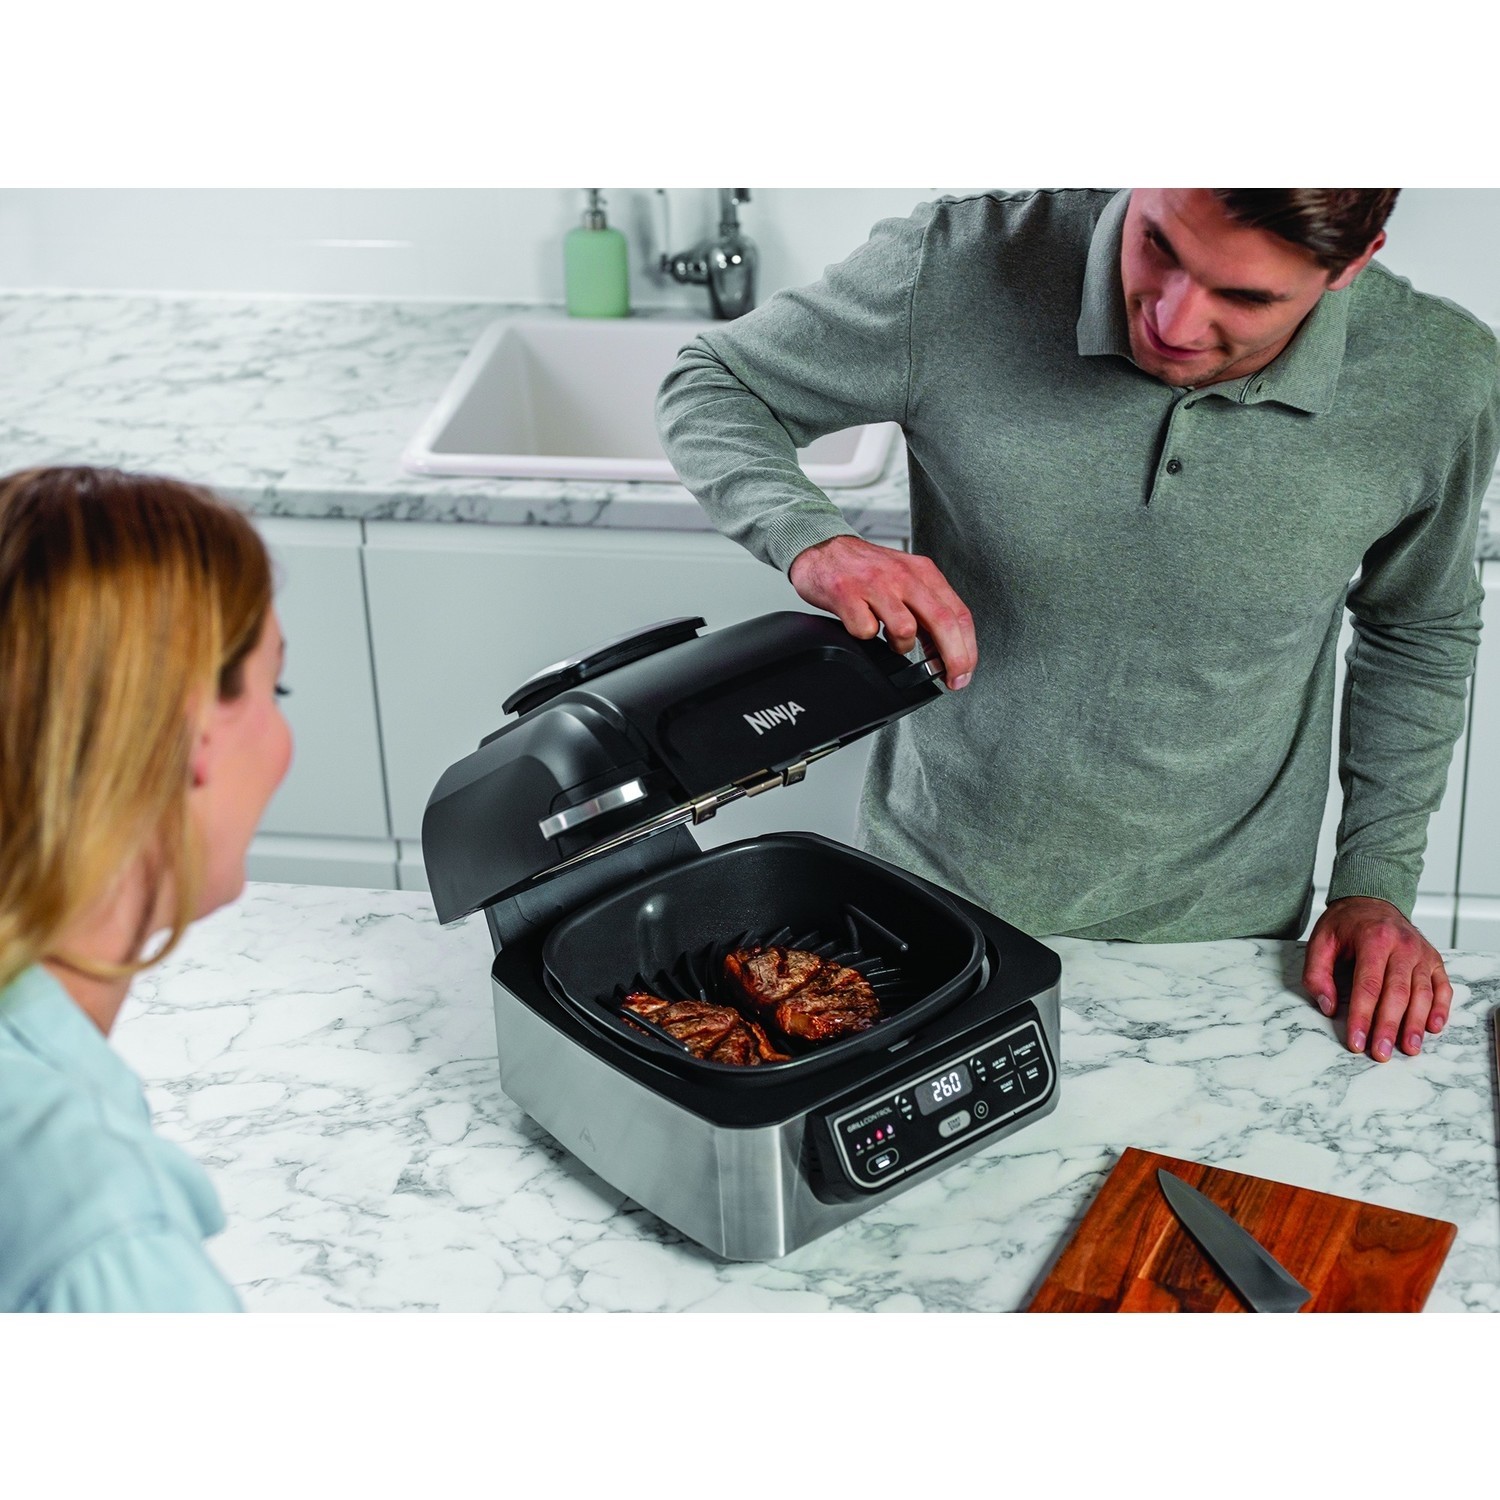  Ninja AG301 Foodi 5-in-1 Indoor Electric Grill with Air Fry,  Roast, Bake & Dehydrate - Programmable, Black/Silver